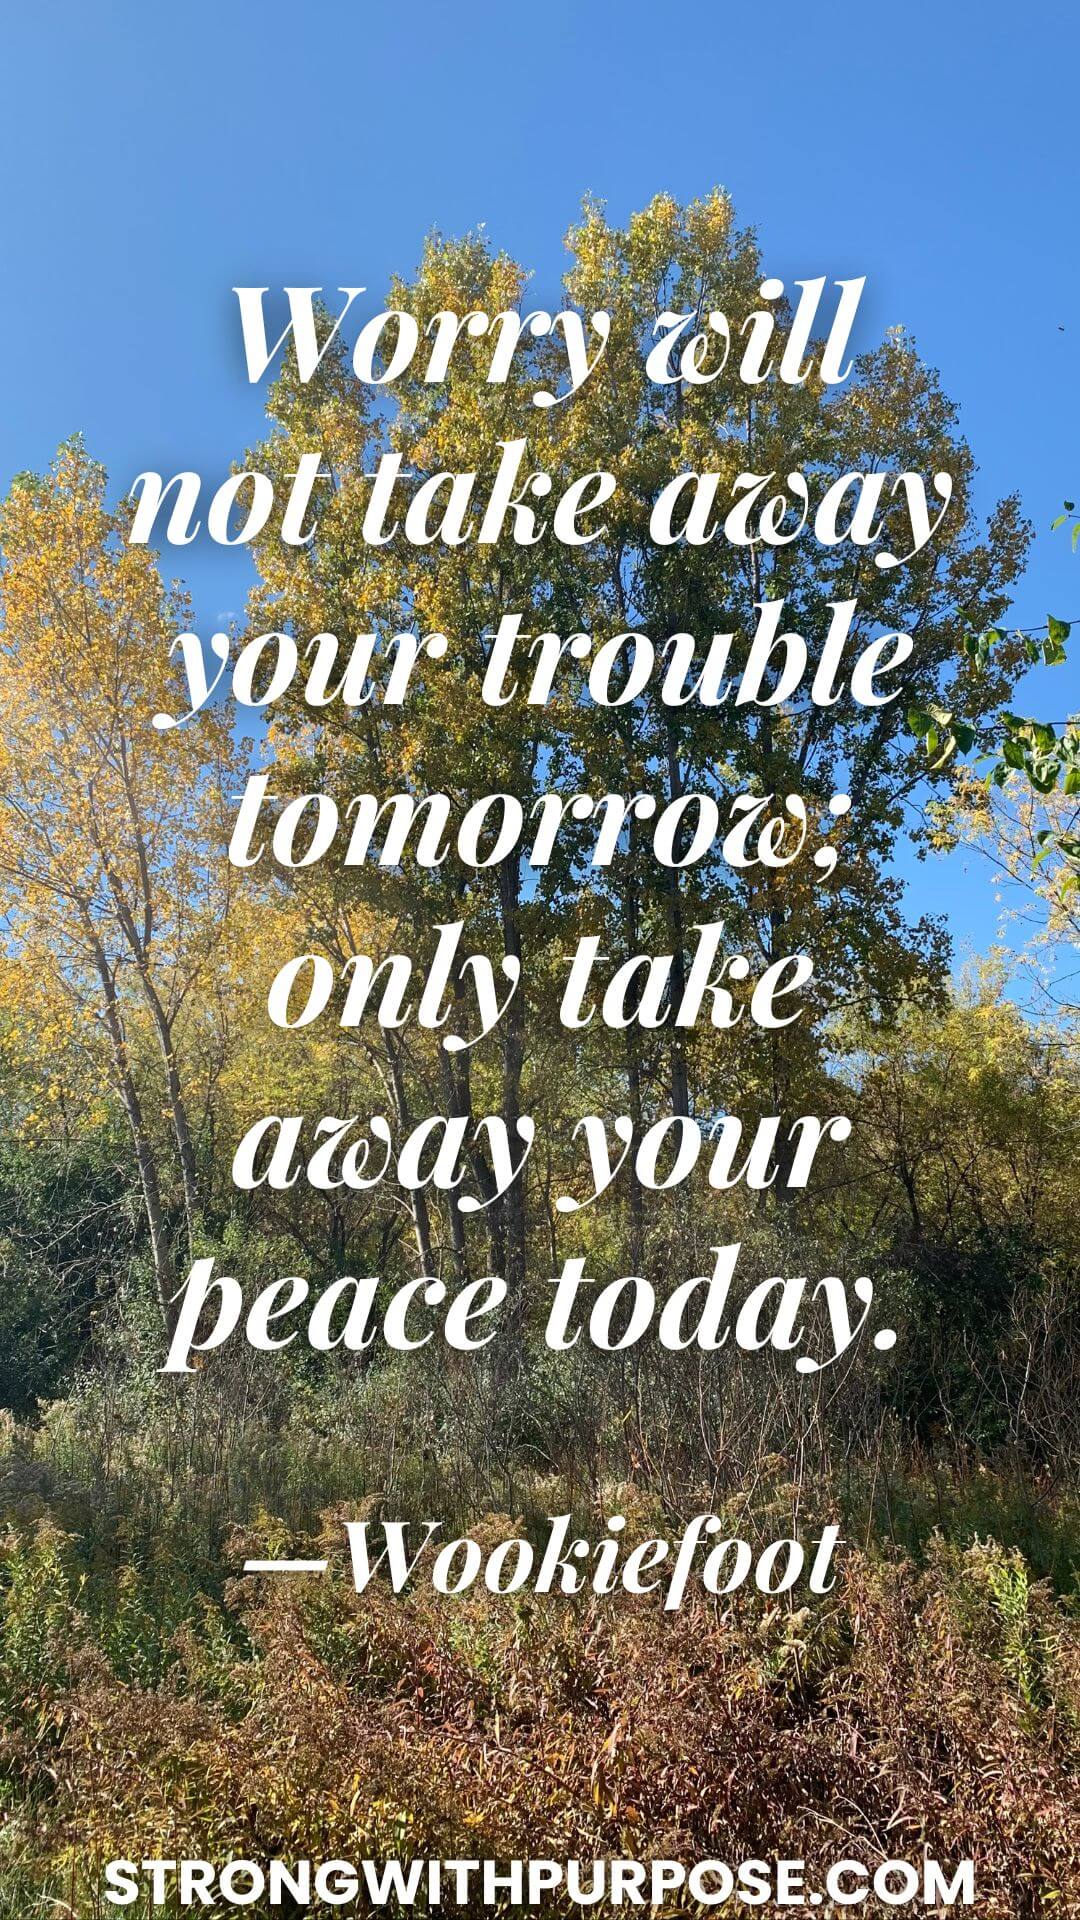 Worry will not take away your trouble tomorrow only take away your peace today - Don't Hold Your Breath Lyrics - Strong with Purpose